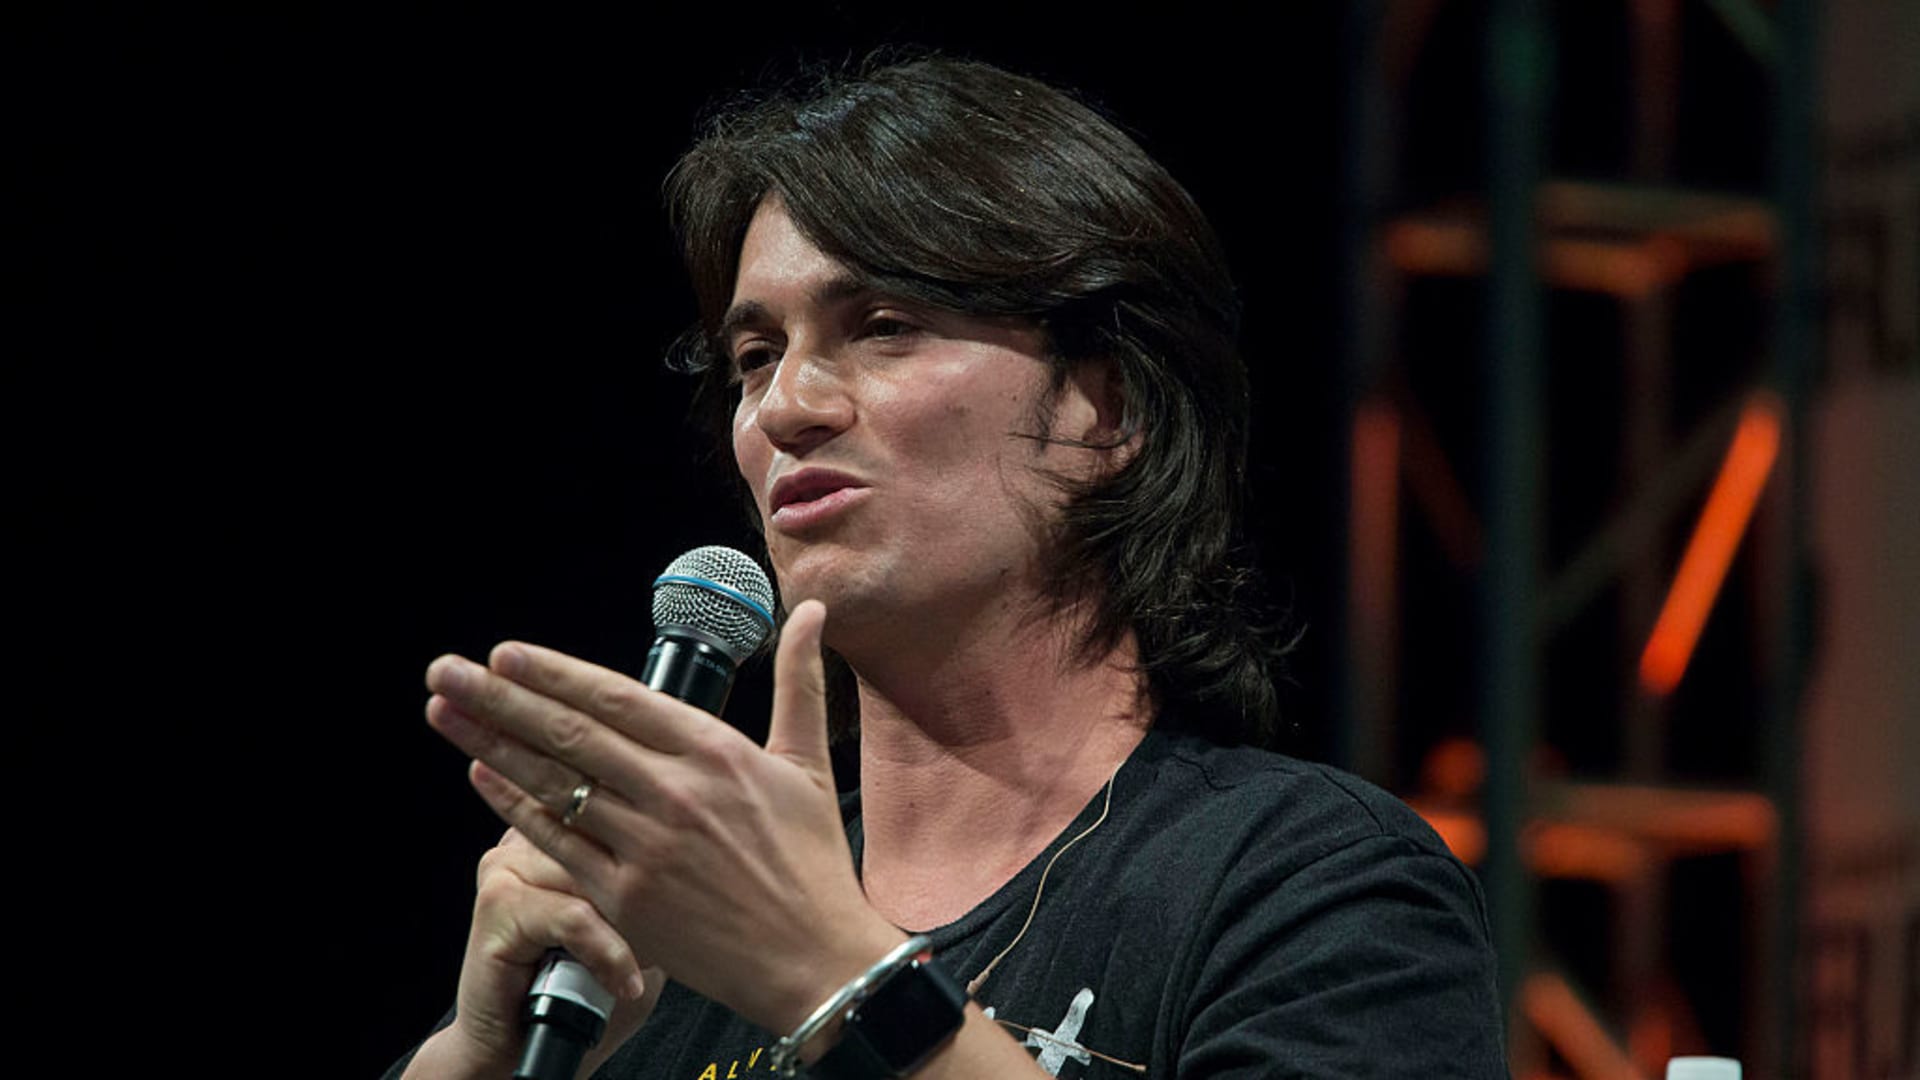 Here’s how much WeWork co-founder Adam Neumann made before the company’s bankruptcy